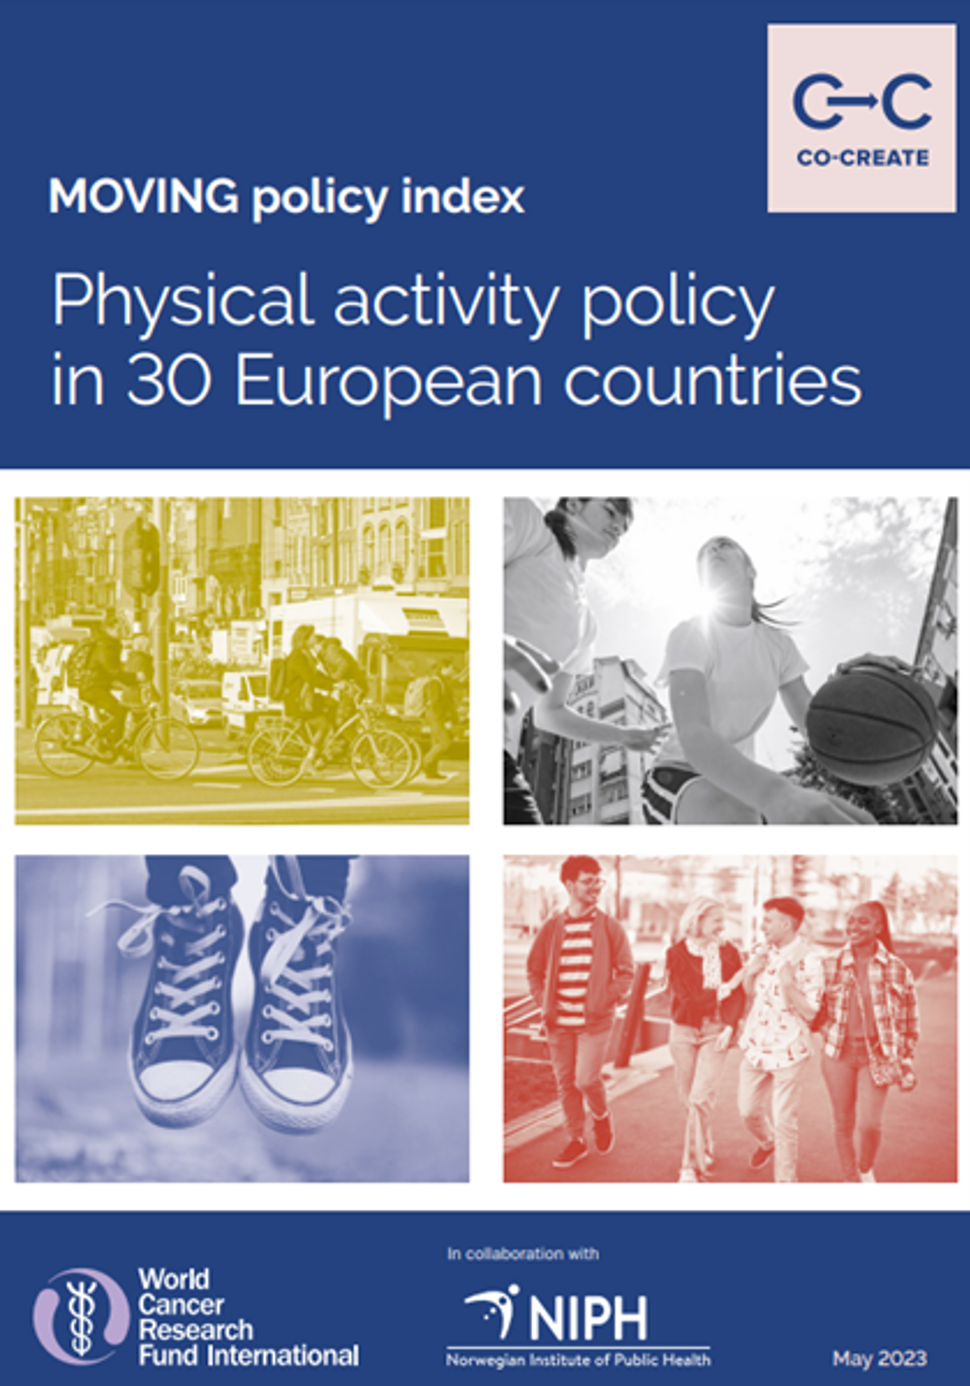 Physical activity indexes